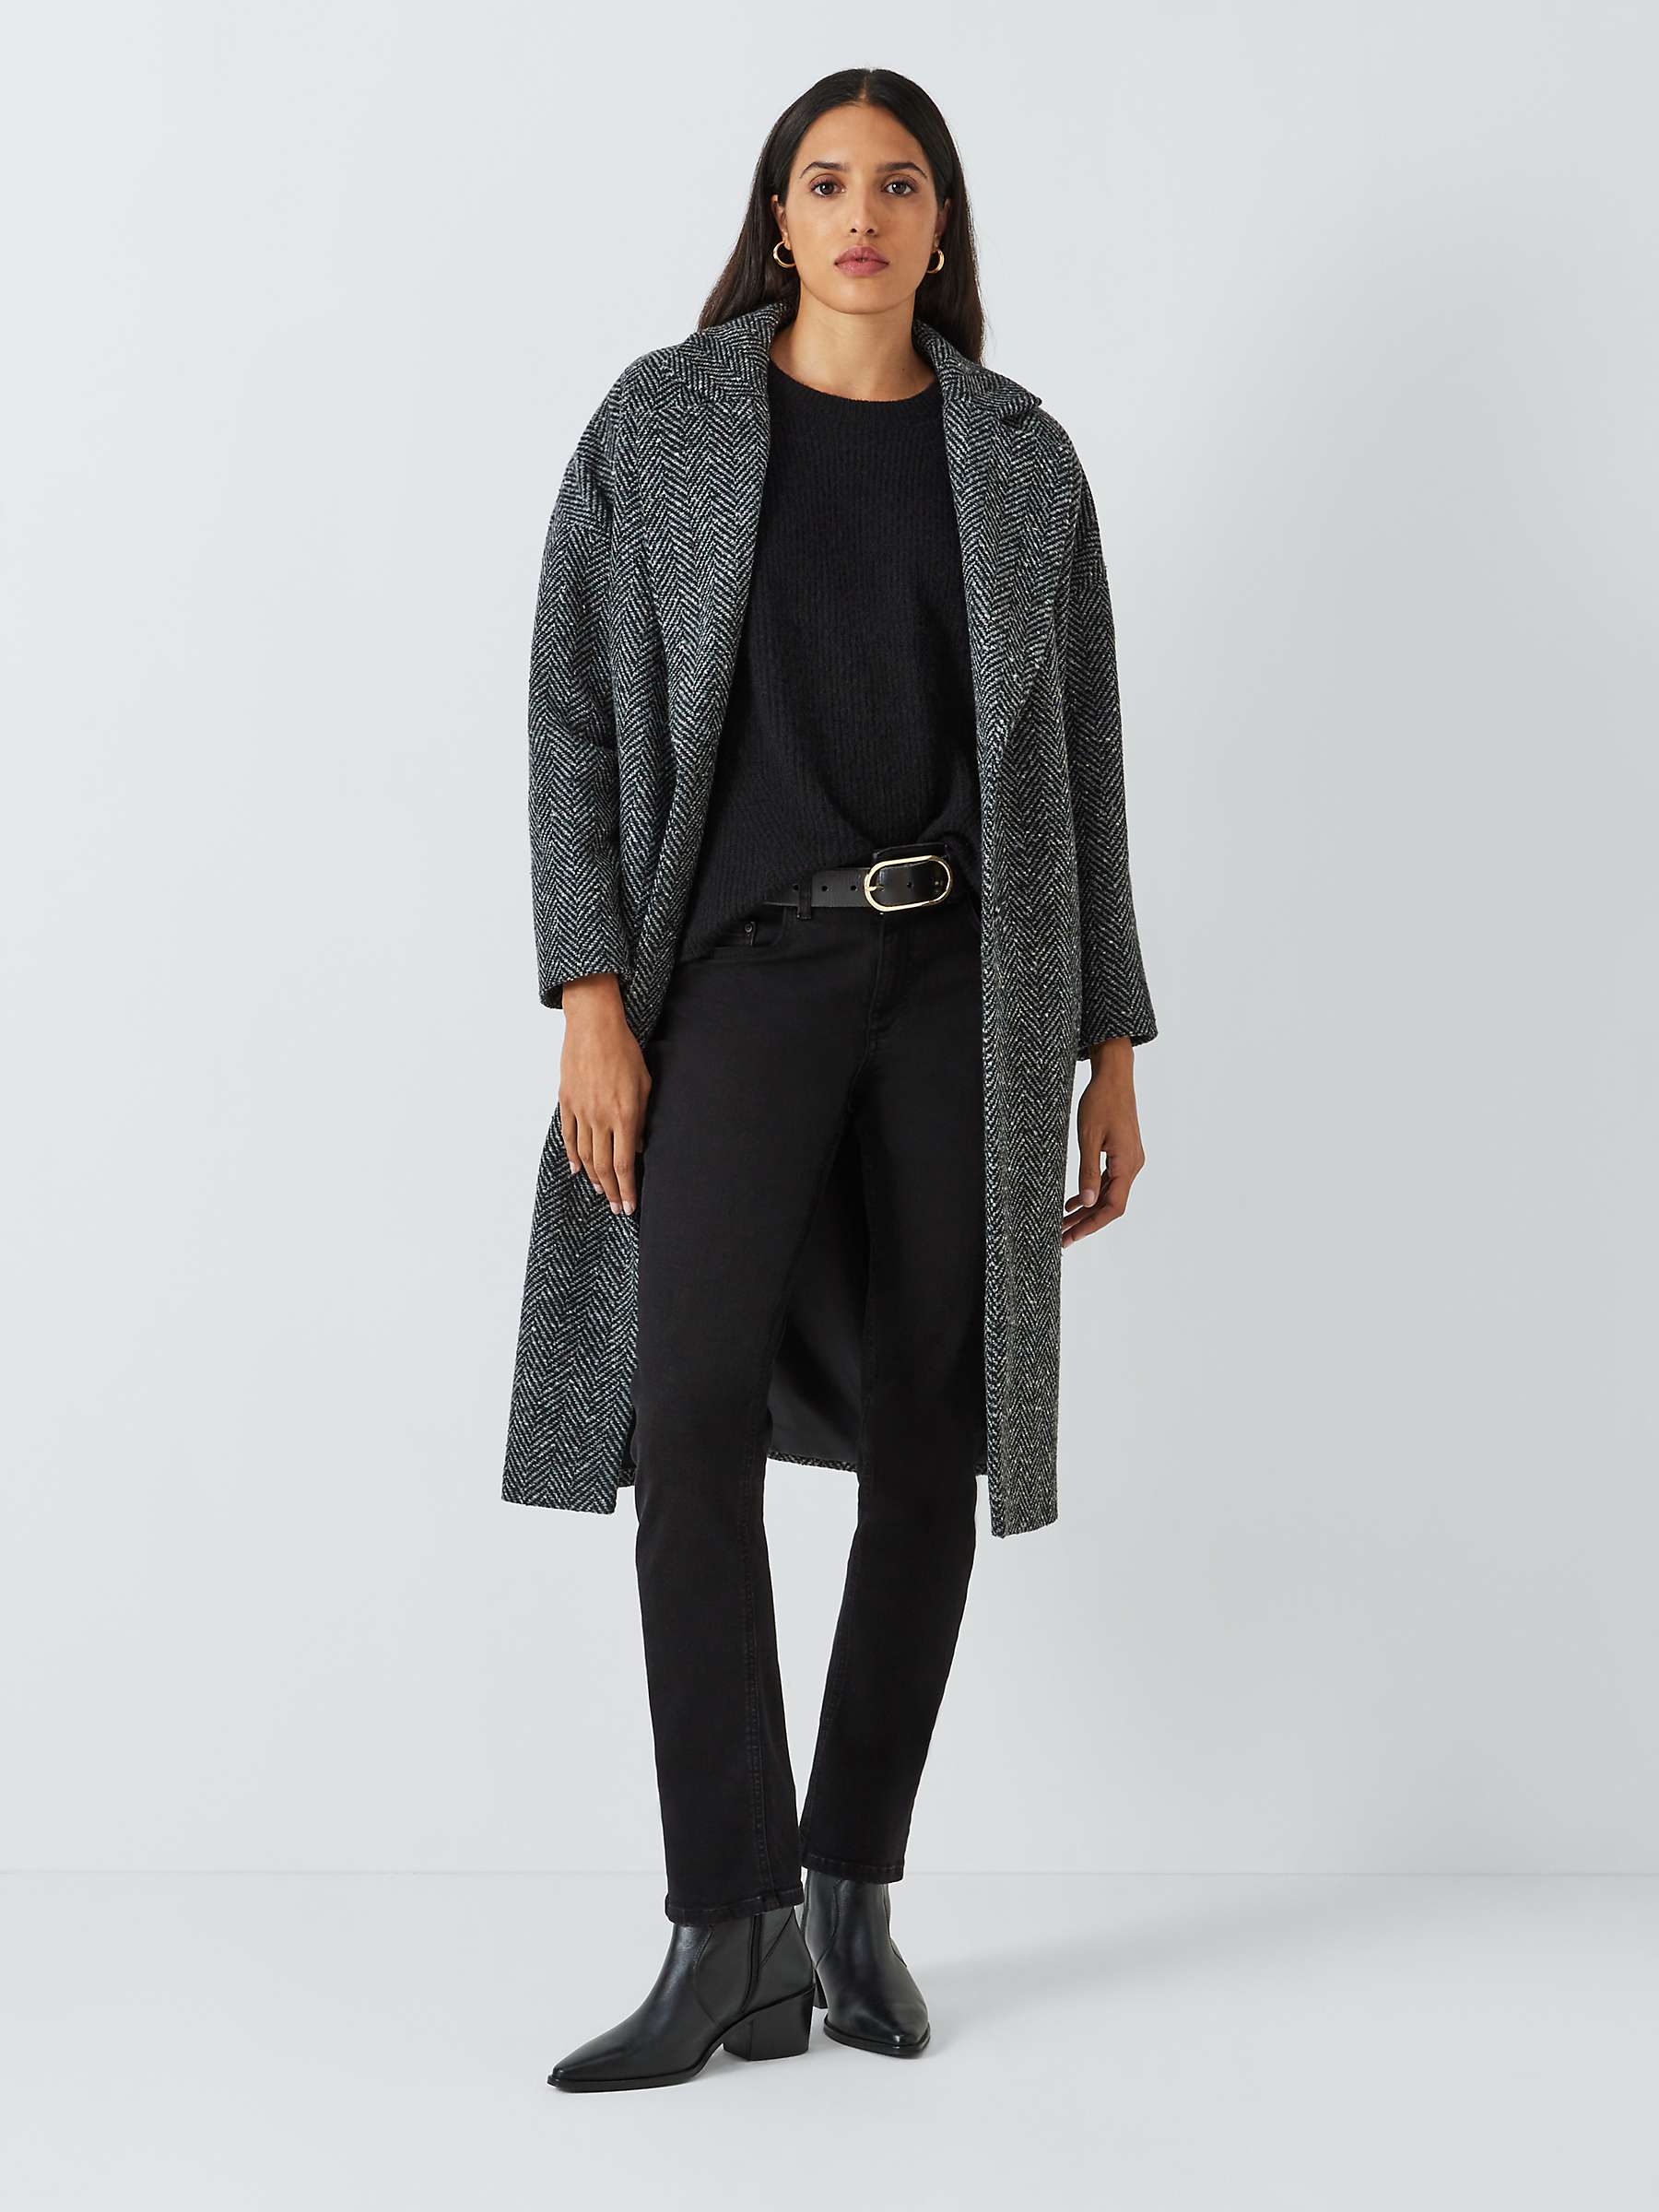 Buy AND/OR Silverlake Straight Cut Jeans, Washed Black Online at johnlewis.com